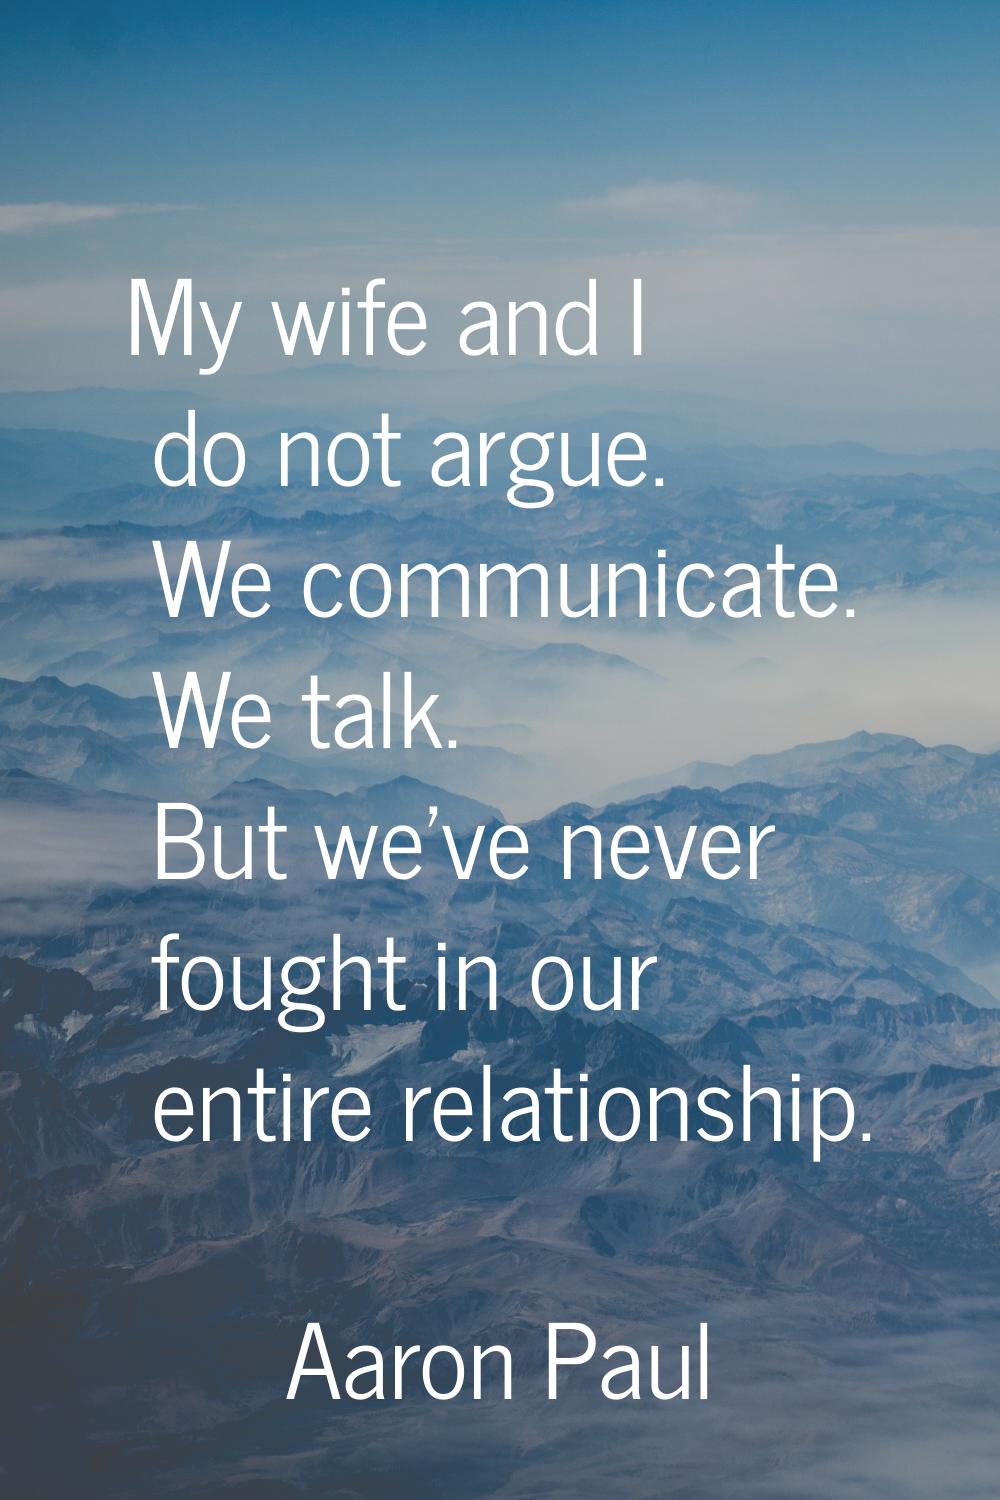 My wife and I do not argue. We communicate. We talk. But we've never fought in our entire relations